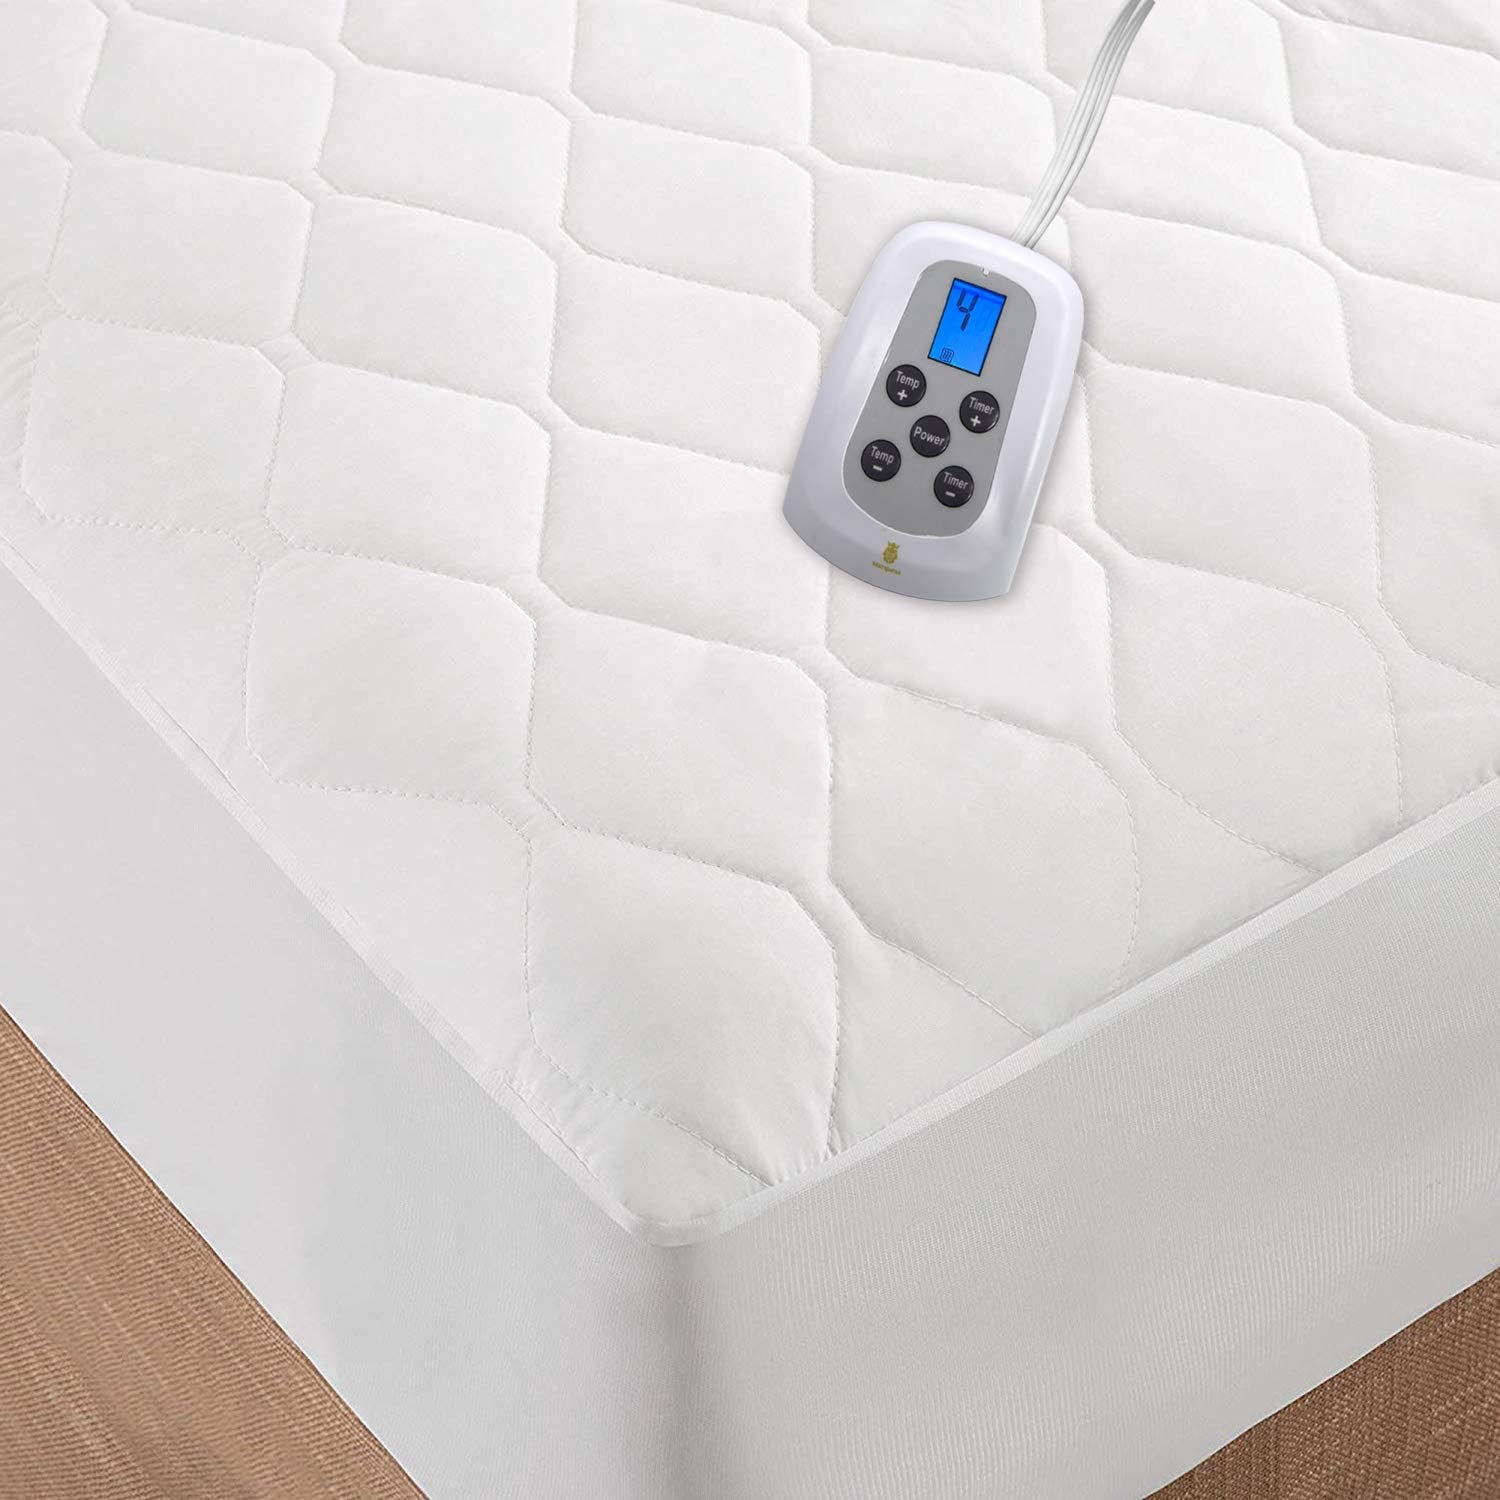 Quilted Heated Mattress Pad Full Size, One Temperature Controller Electric, Soft Warming and Fitted Bed Skirt Design, Washable, Fits up to 18'' Deep, with 10 Heating Settings/Safety 10 Hours (White)